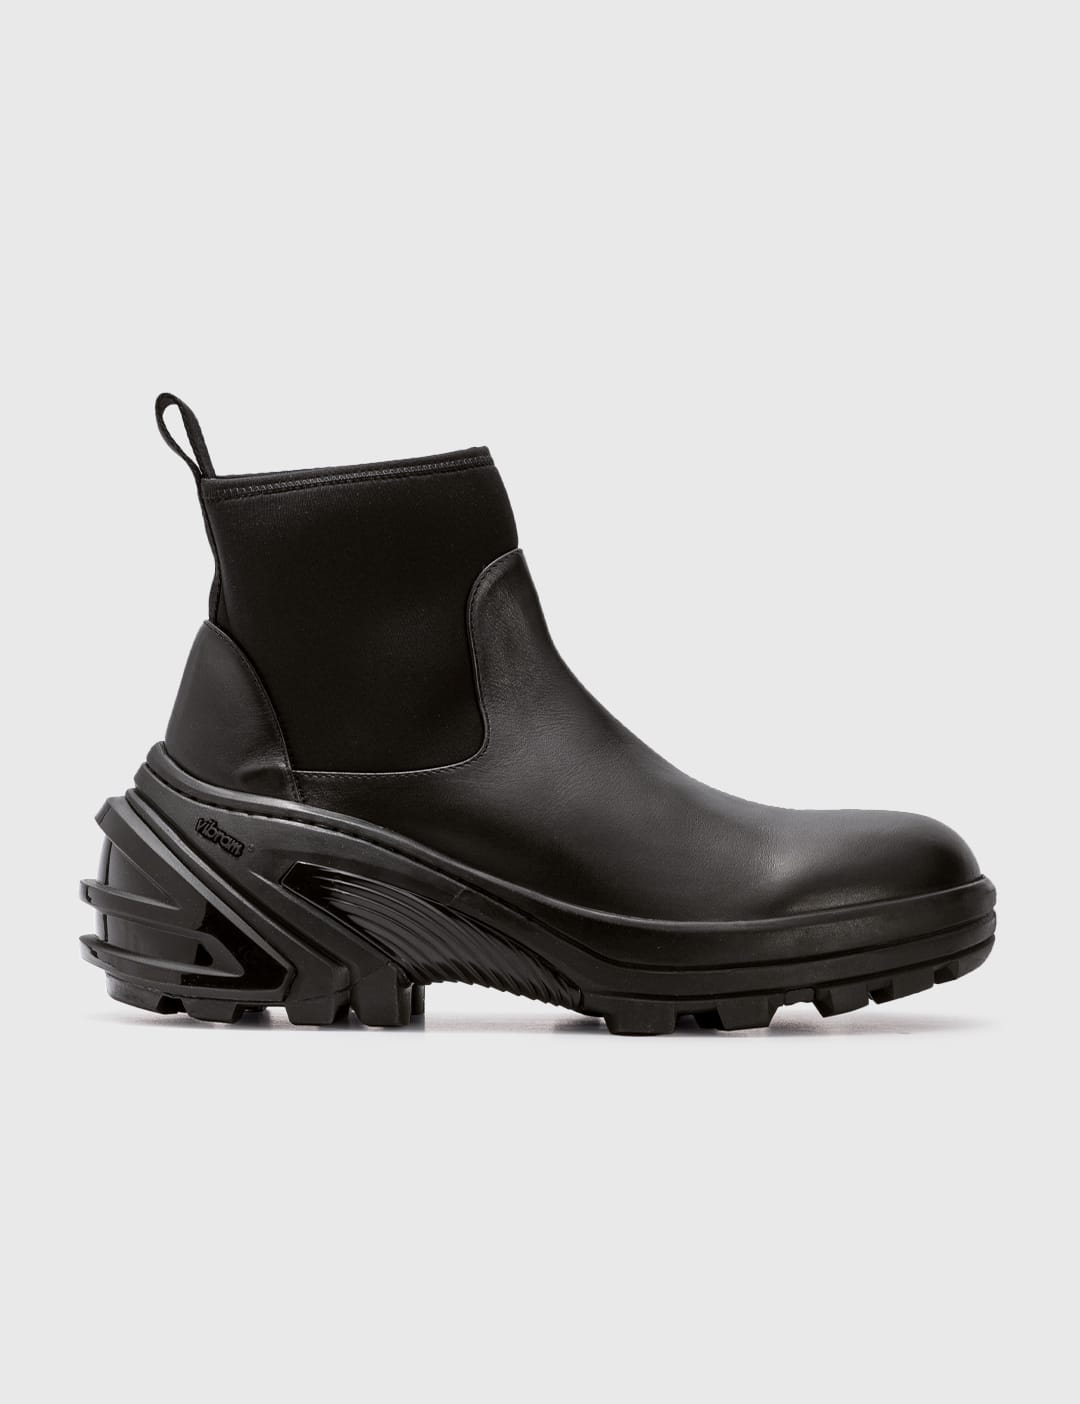 1017 ALYX 9SM - Leather Mid Boot With SKX Sole | HBX - Globally ...